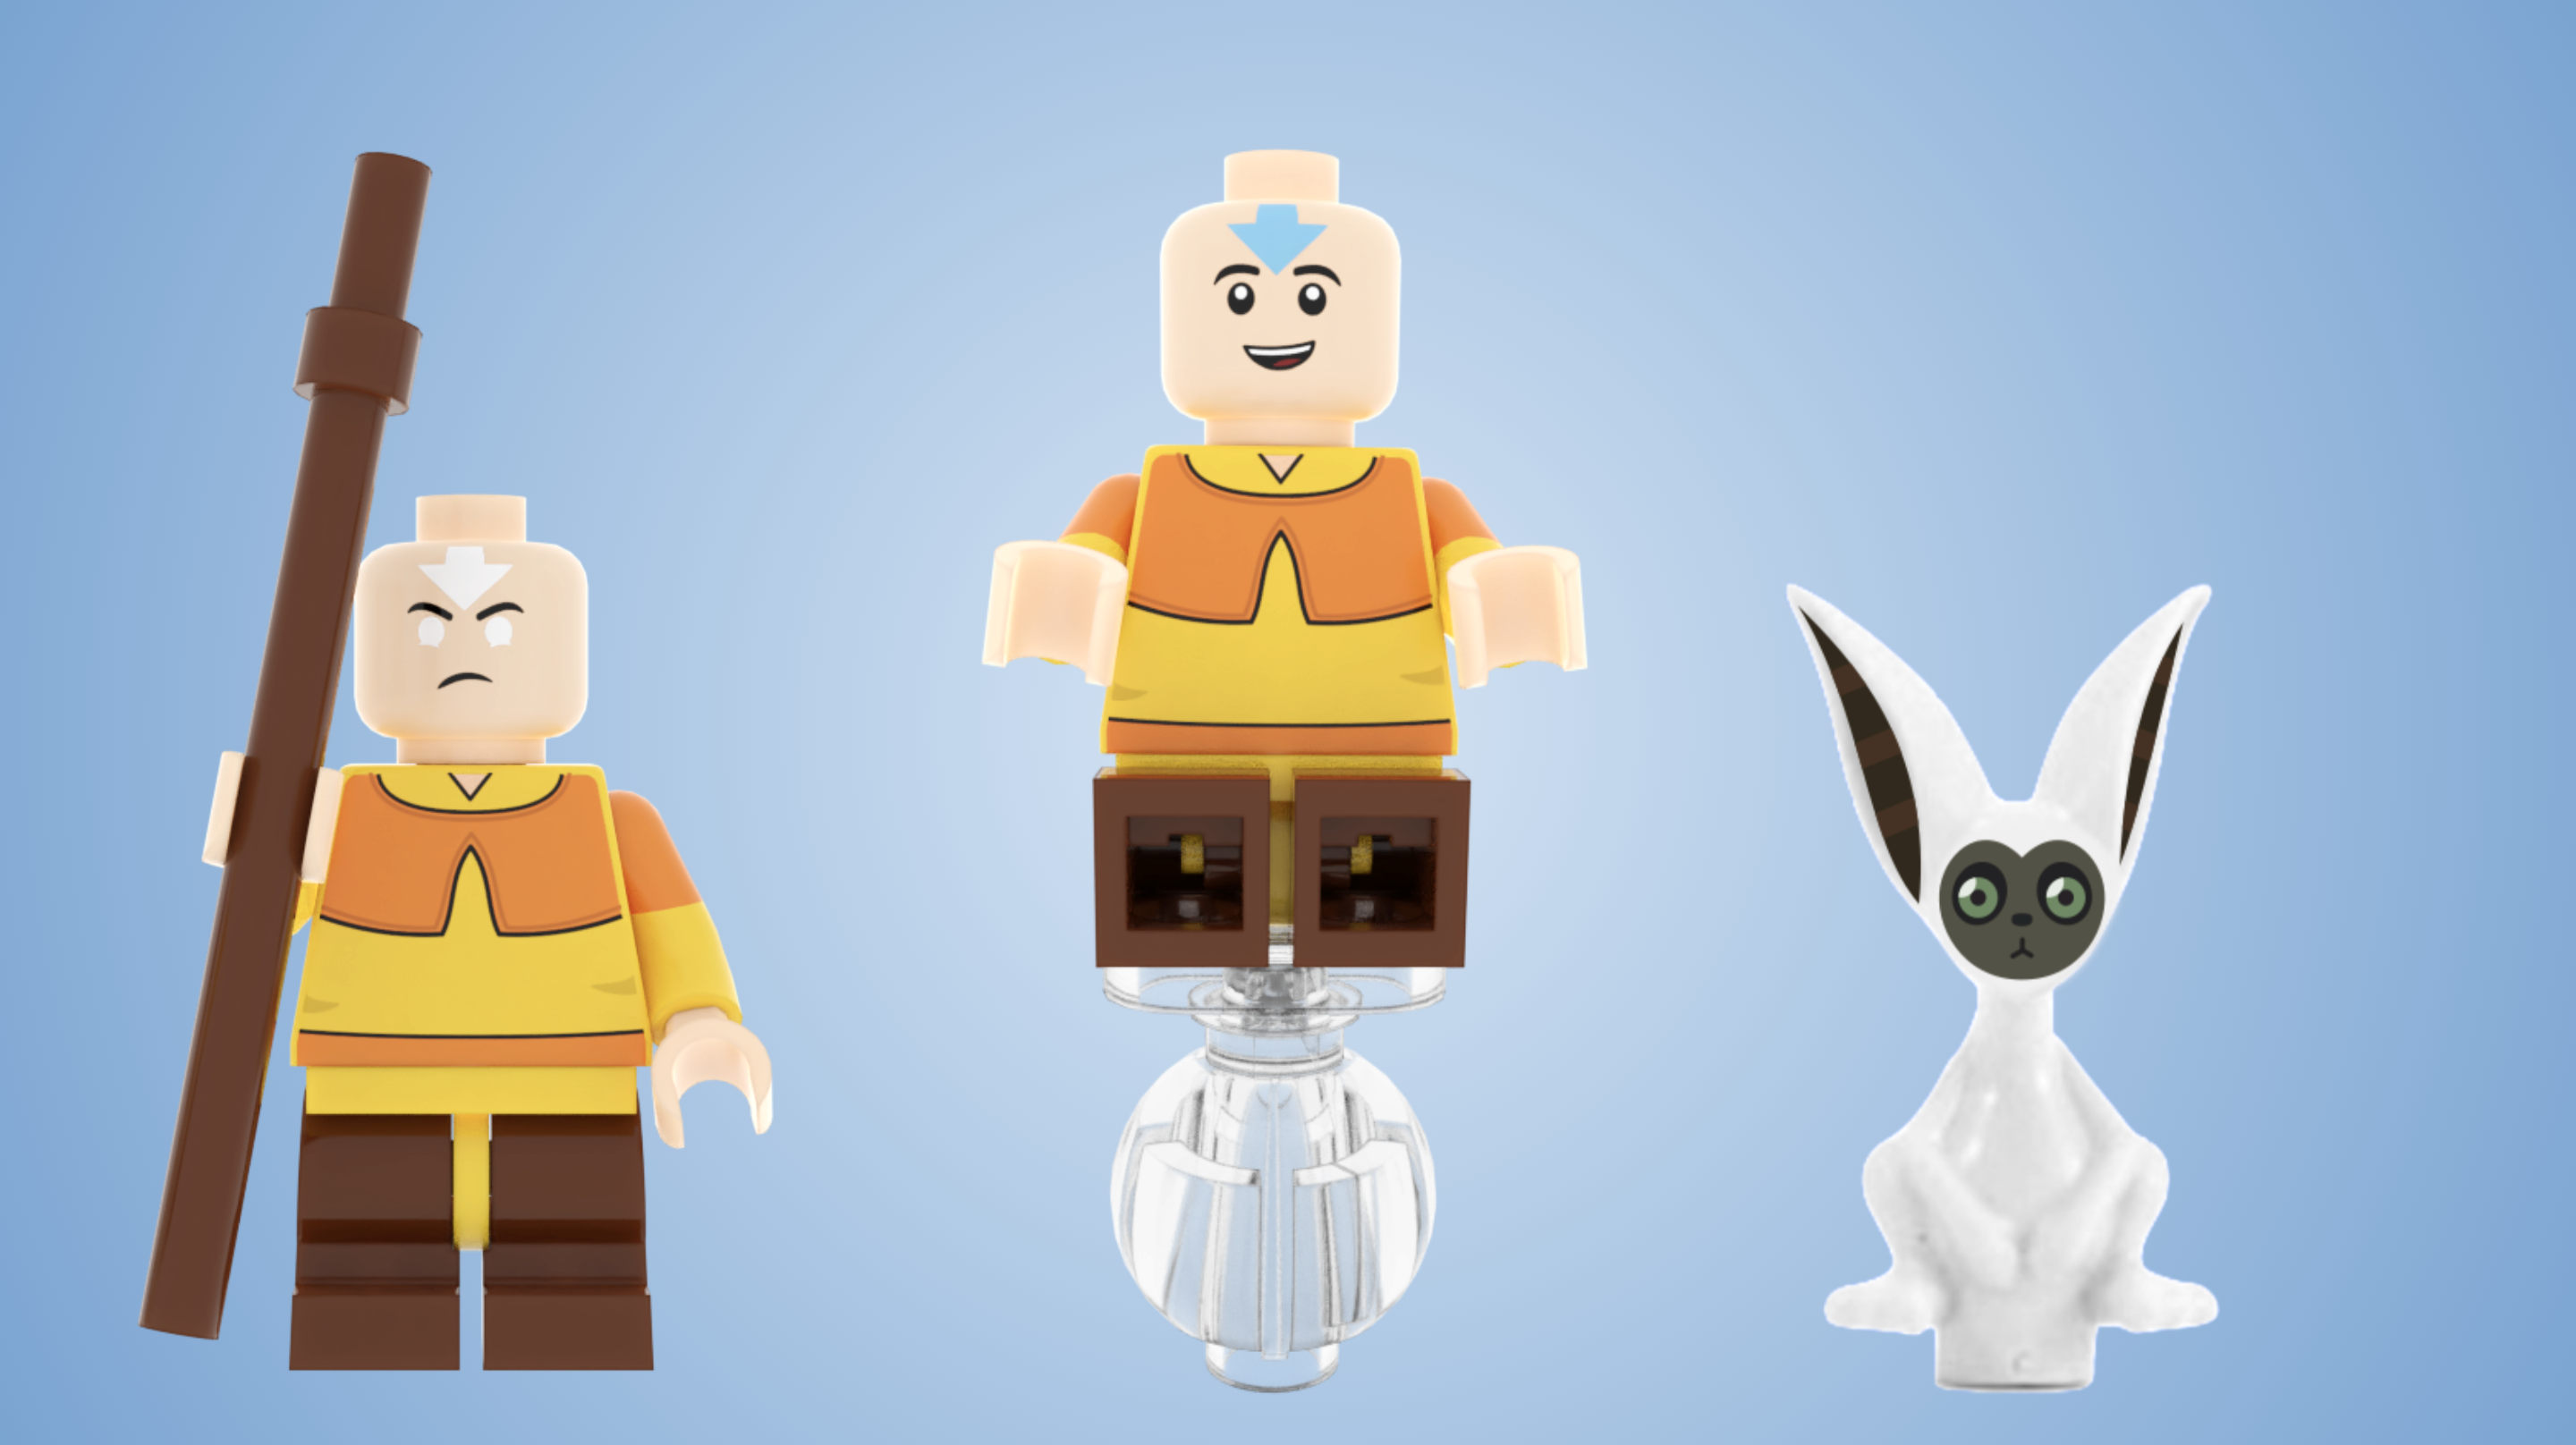 LEGO Avatar The Last Airbender – Will it come back?